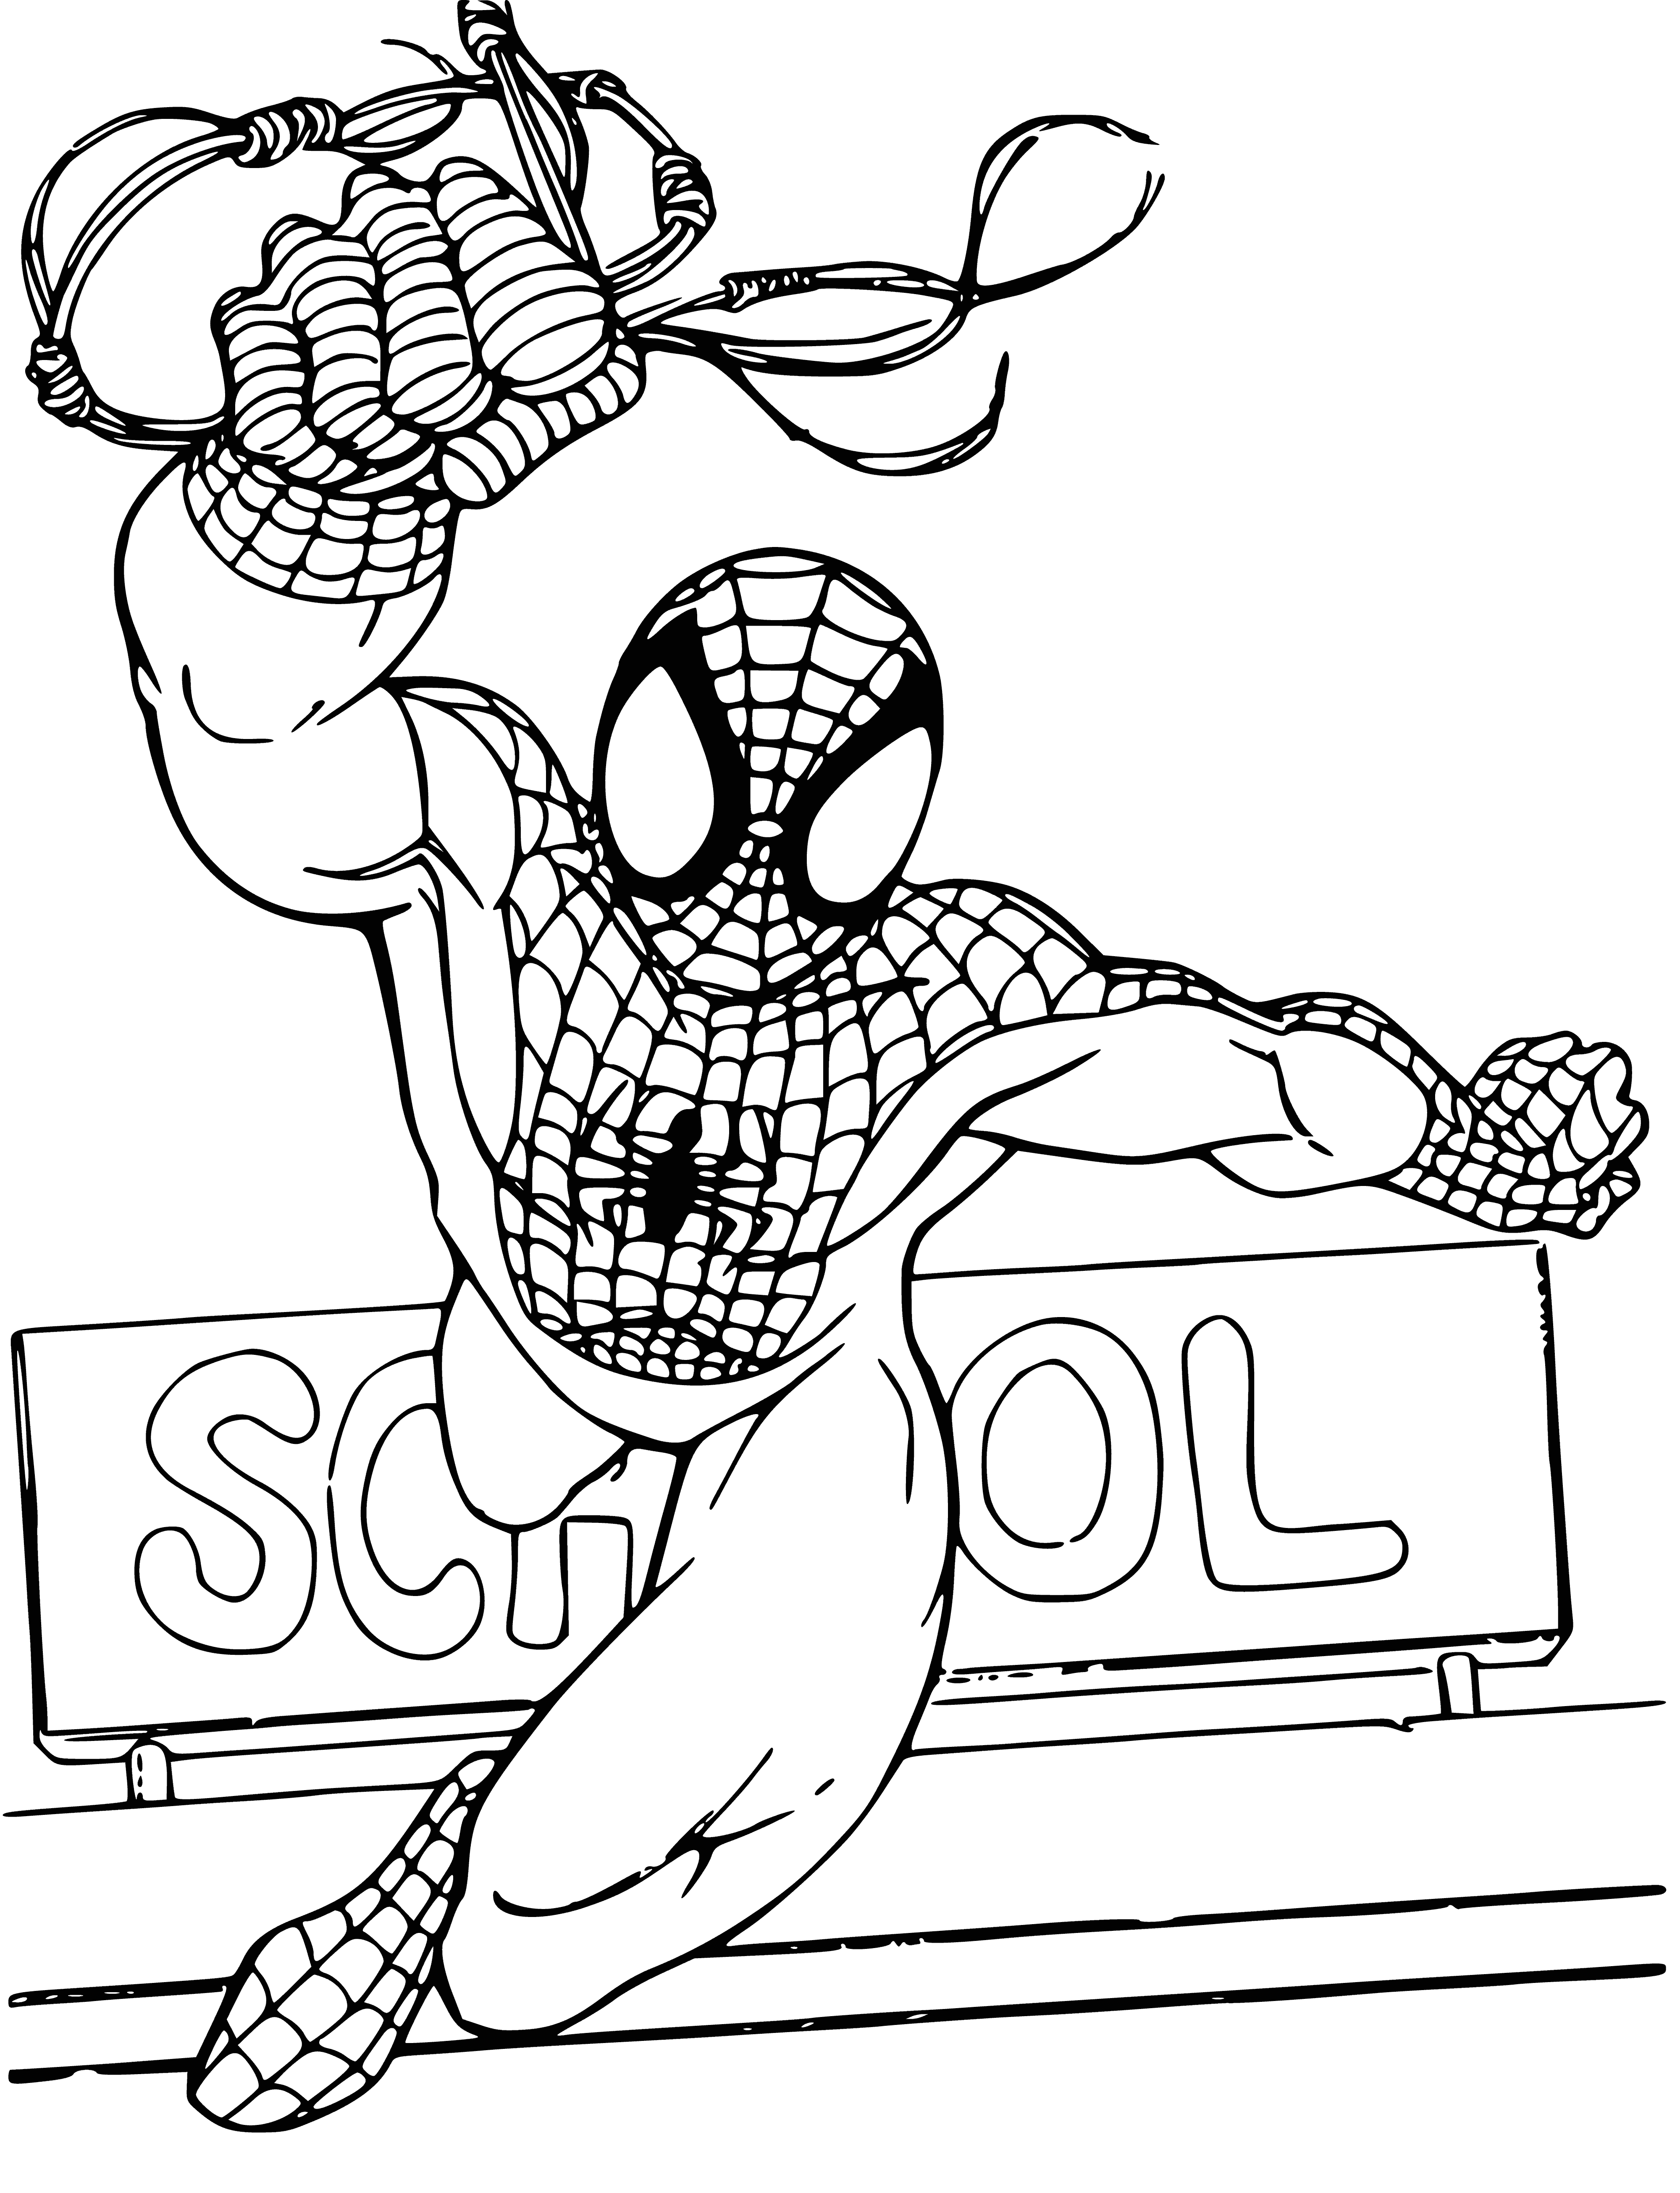 coloring page: Spider-Man in red/blue suit w/ black mask & white eyes standing on a building, arms outstretched.